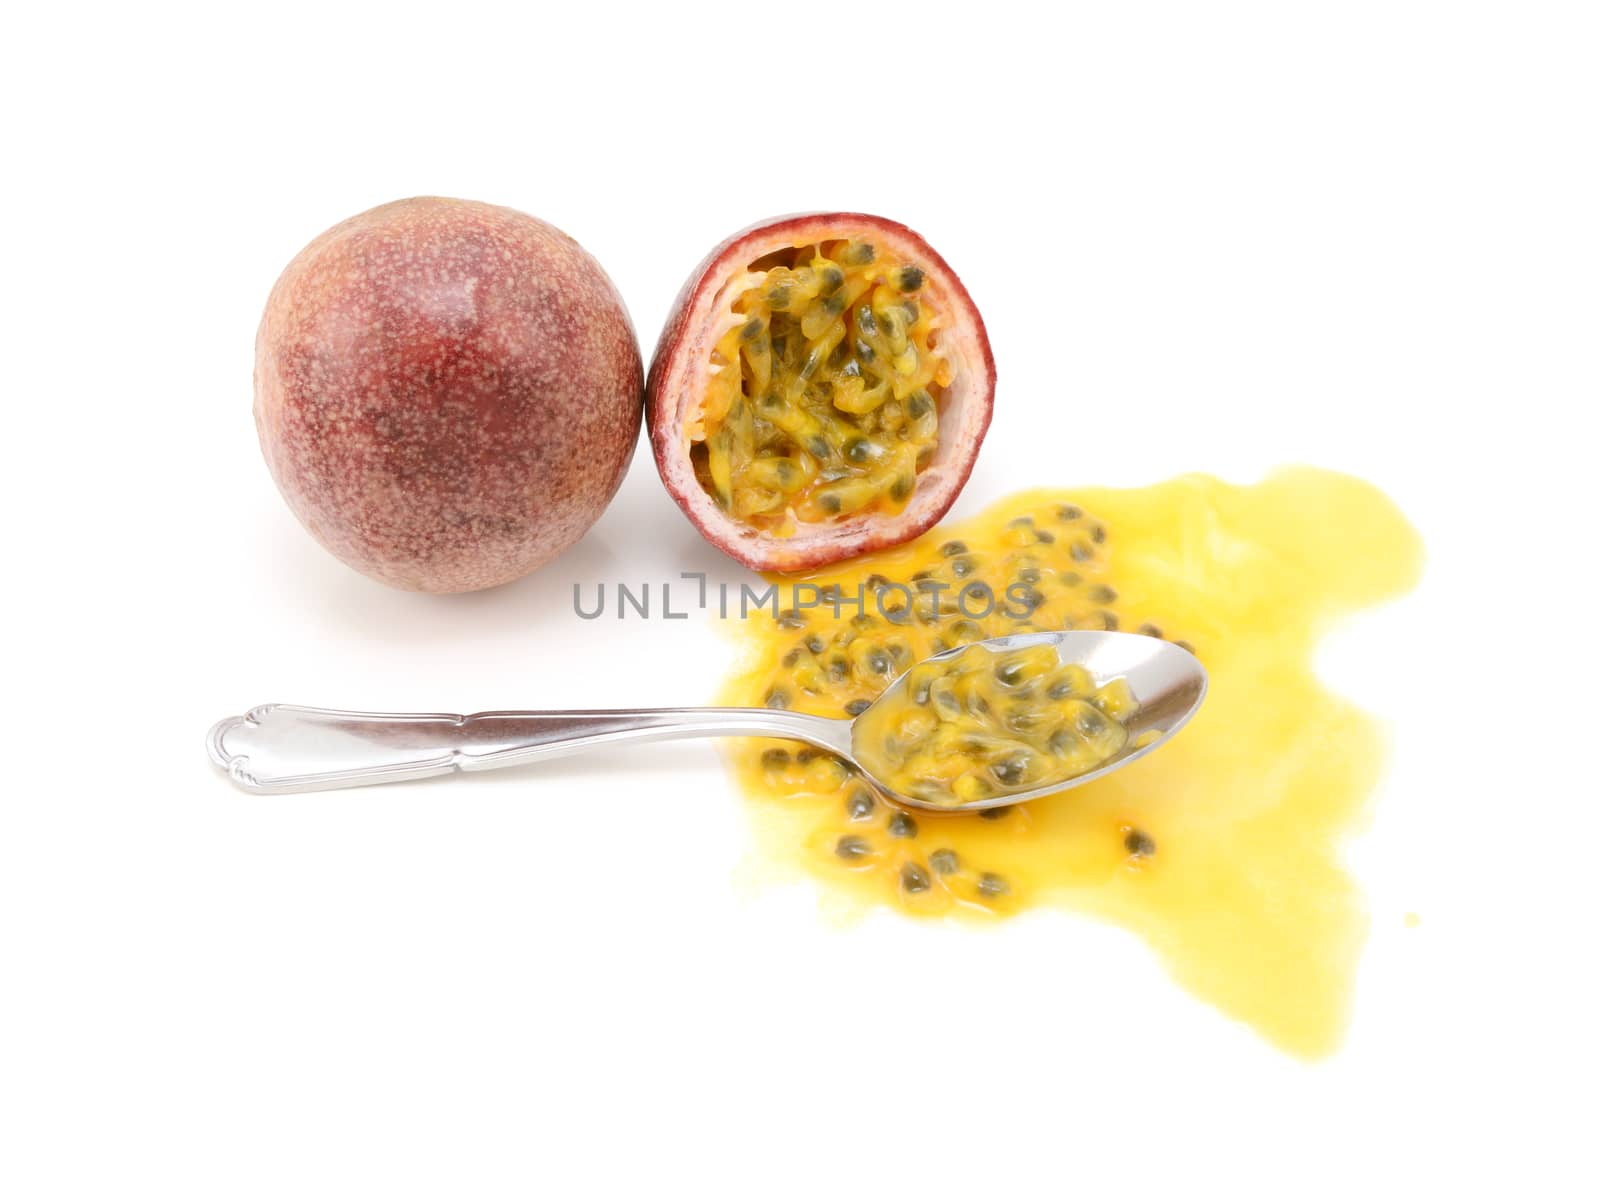 Whole passion fruit and half-eaten cross section with spoon by sarahdoow